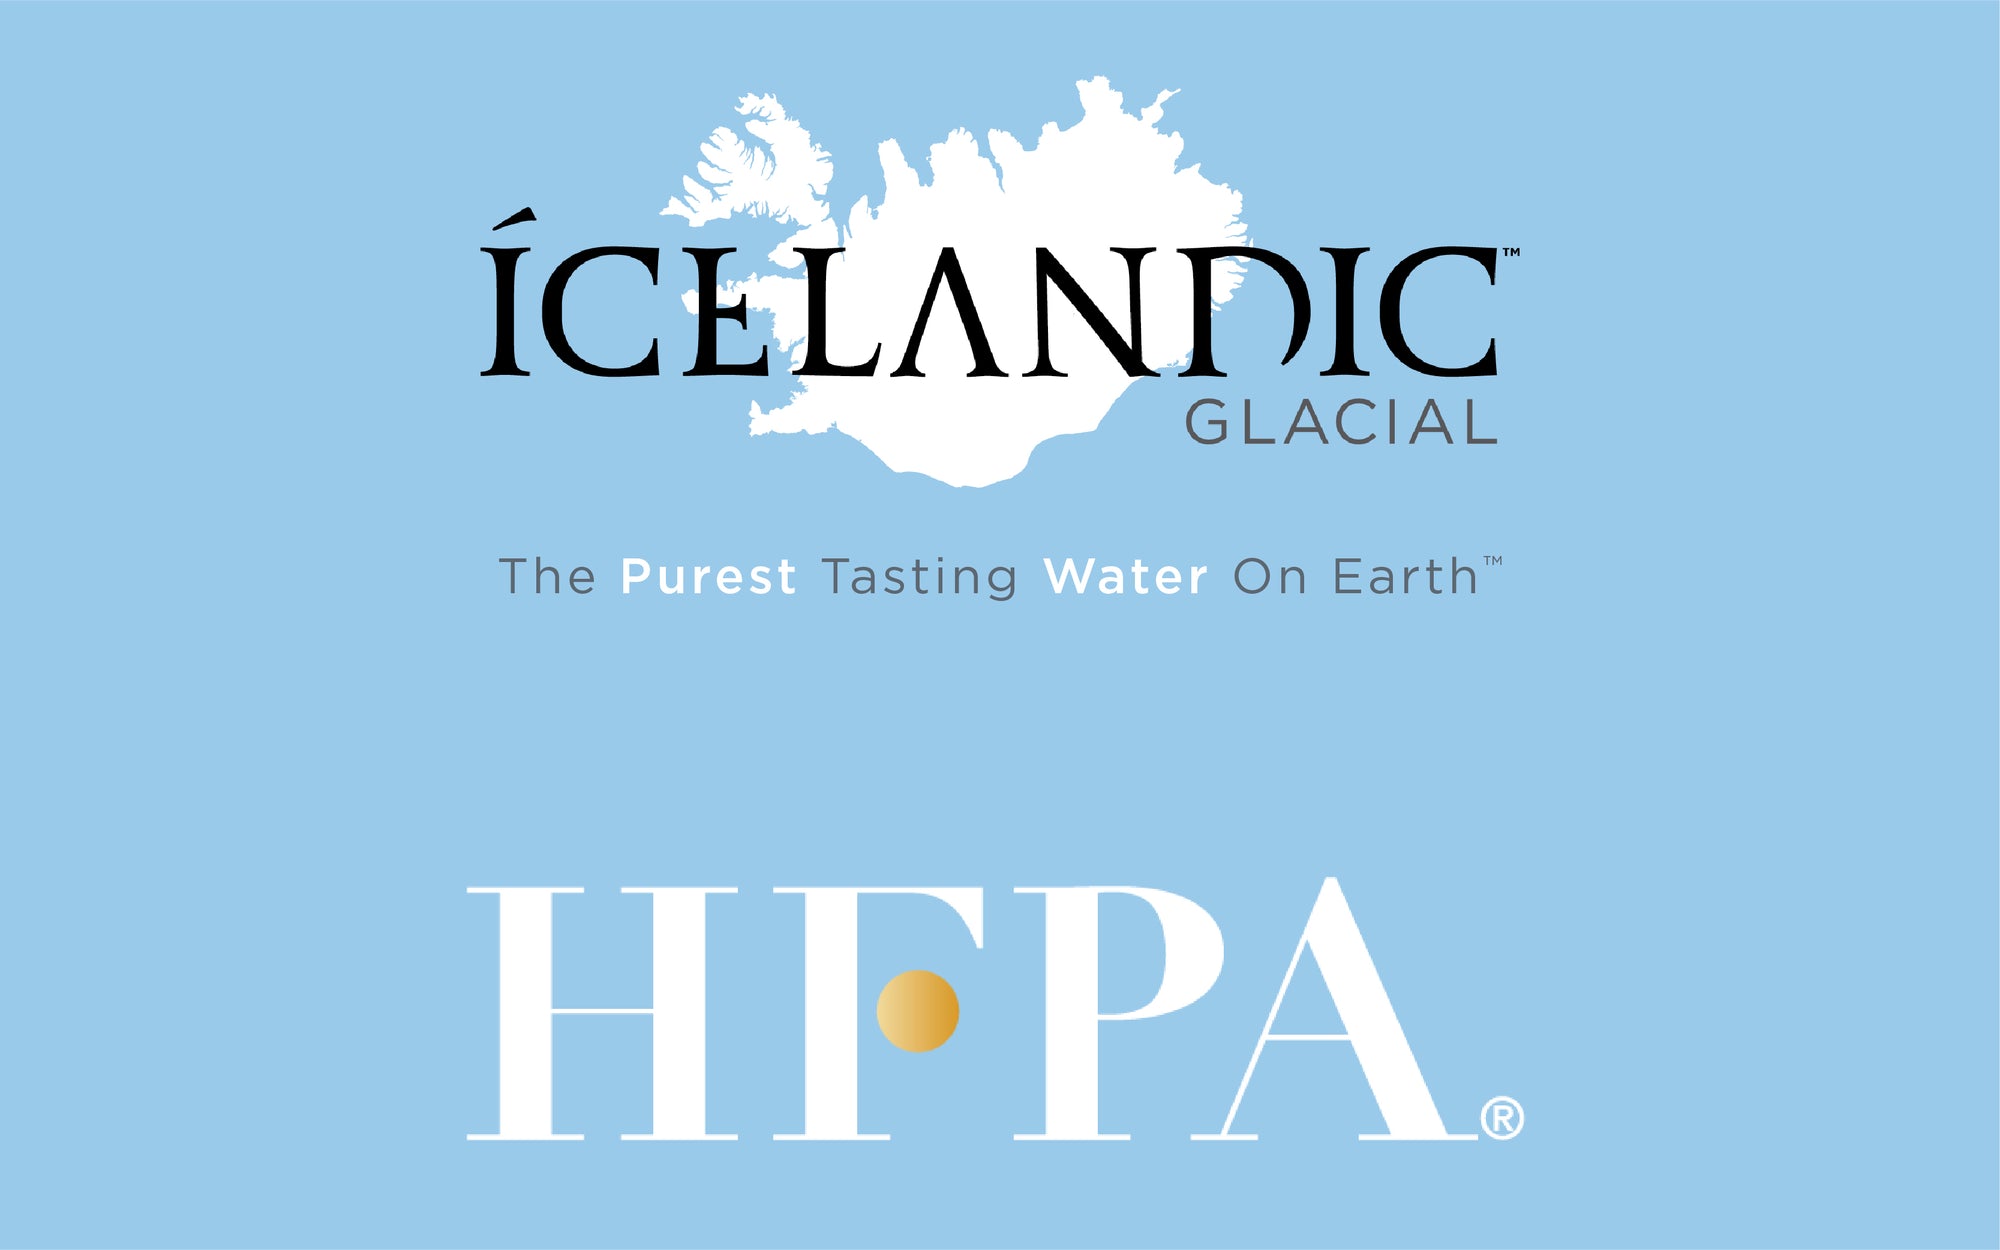 The Hollywood Foreign Press Association and Icelandic Glacial Team Up to Support Disaster Relief Efforts in Flint and Puerto Rico